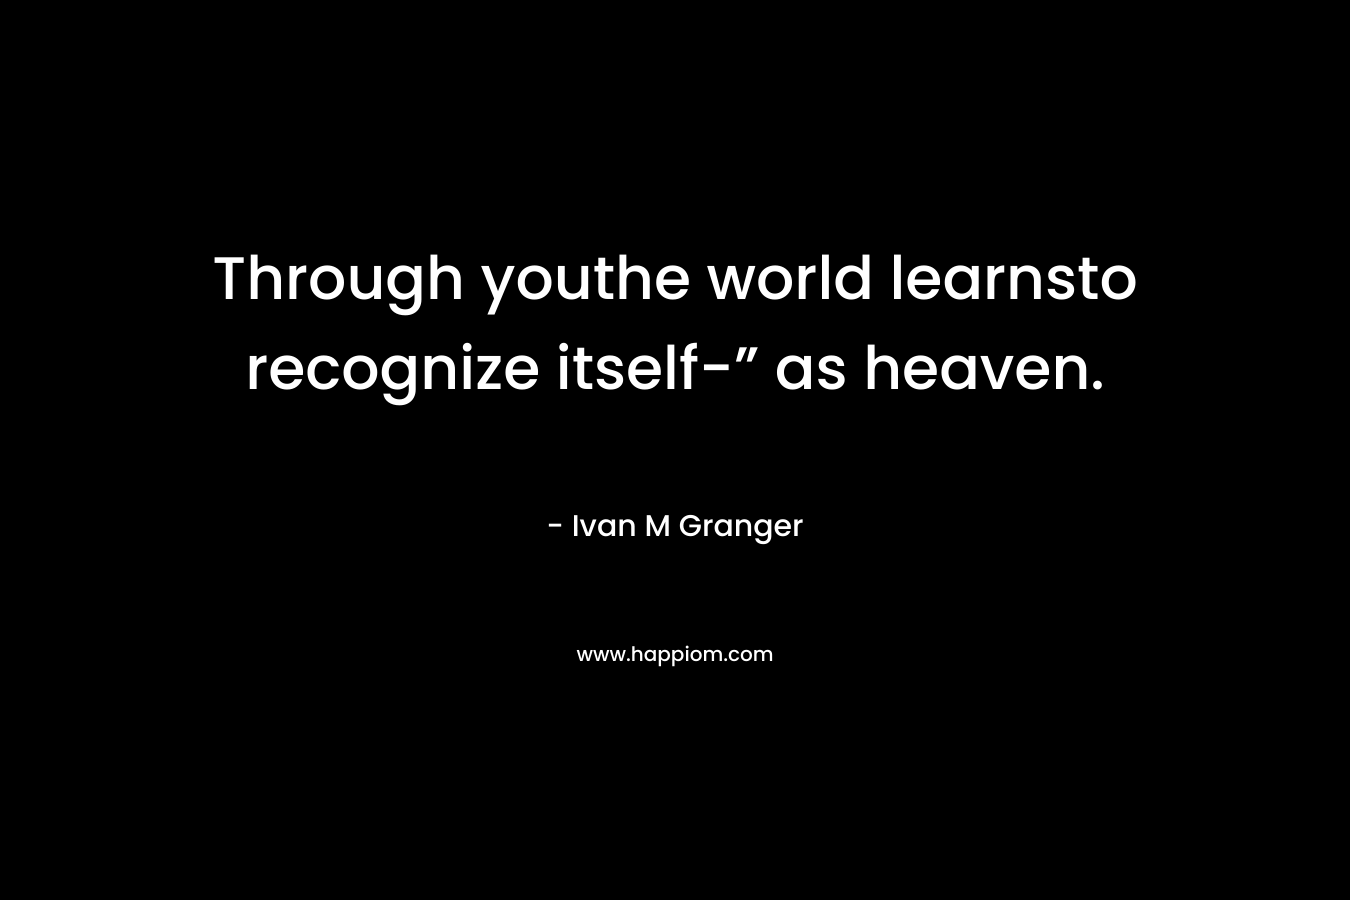 Through youthe world learnsto recognize itself-” as heaven. – Ivan M Granger